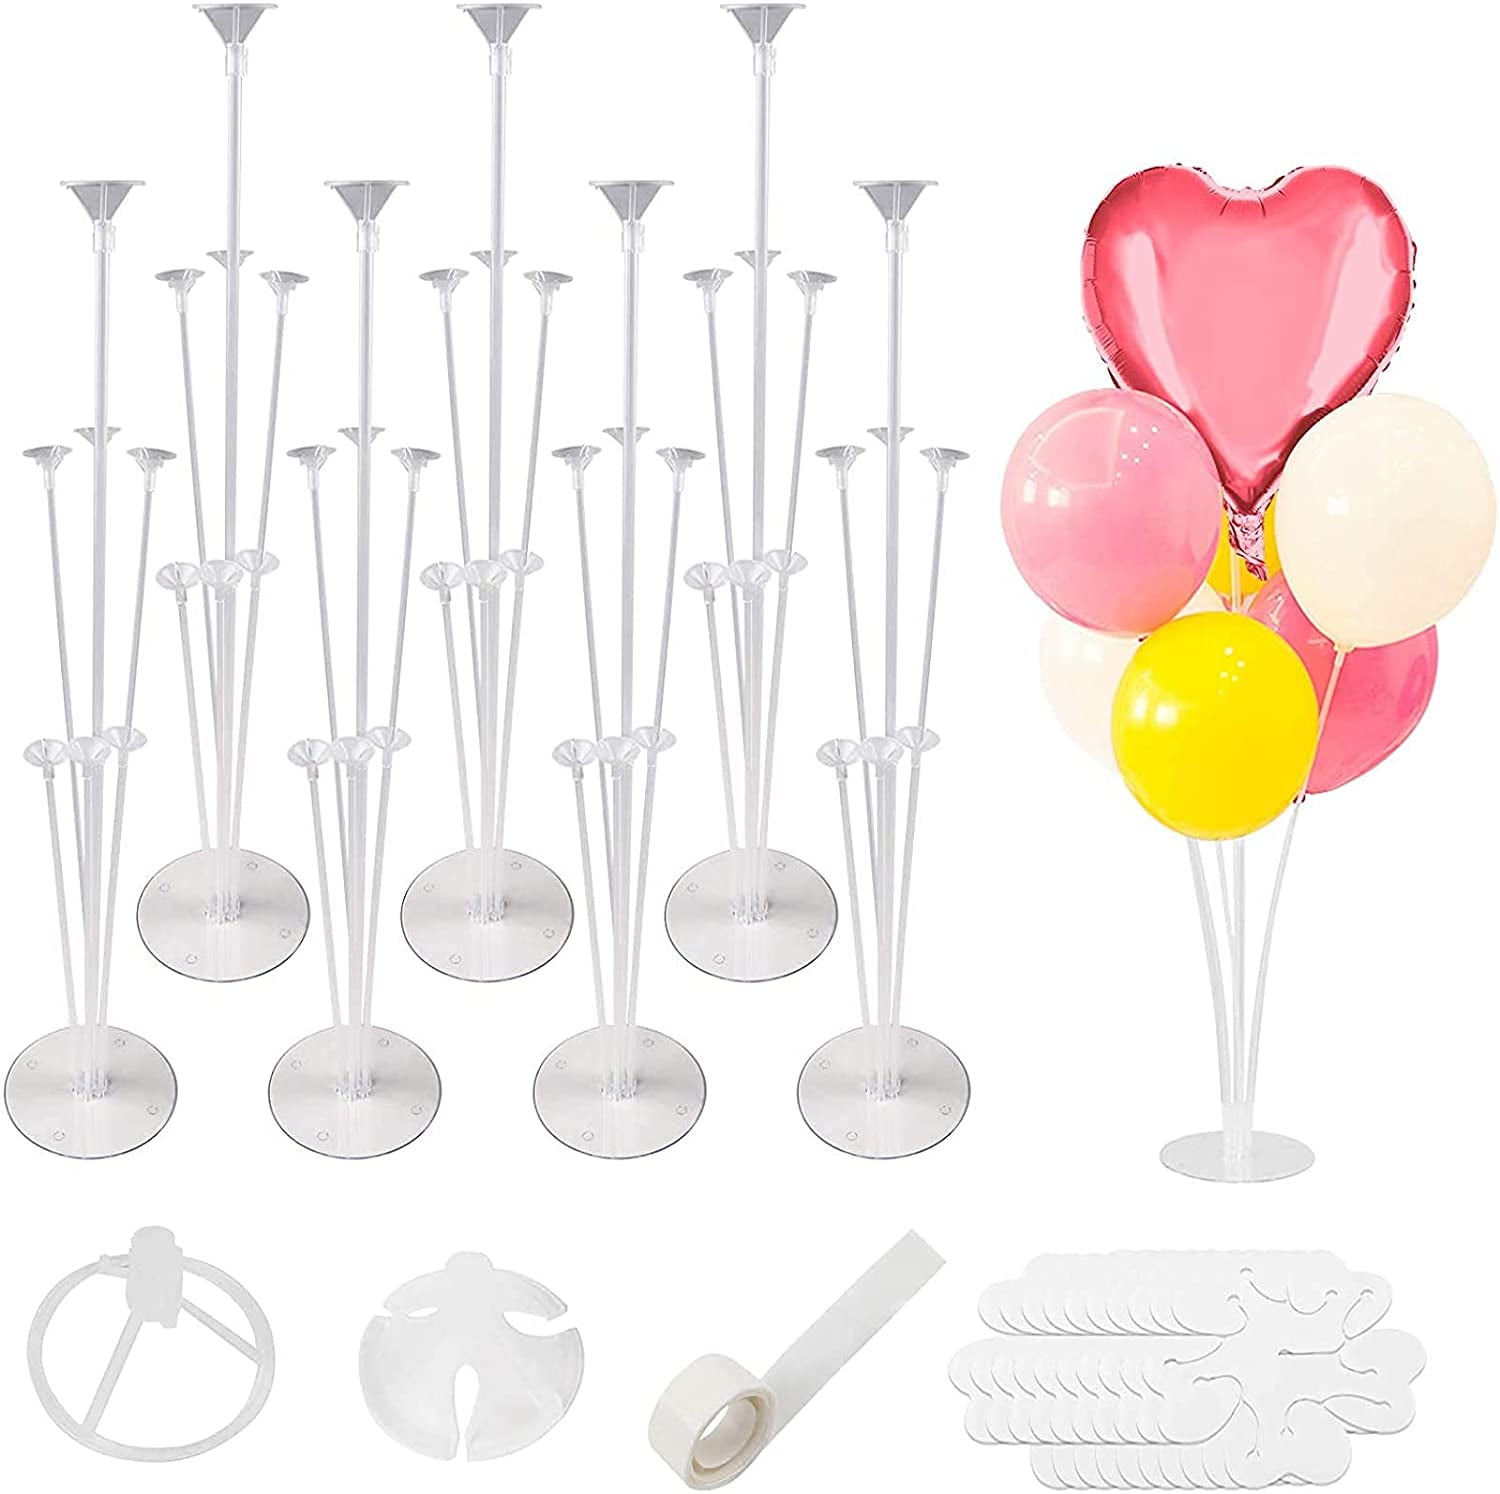 Details about   BALLON STAND Holder Column Confetti Birthday Wedding Party Decoration Balloons 